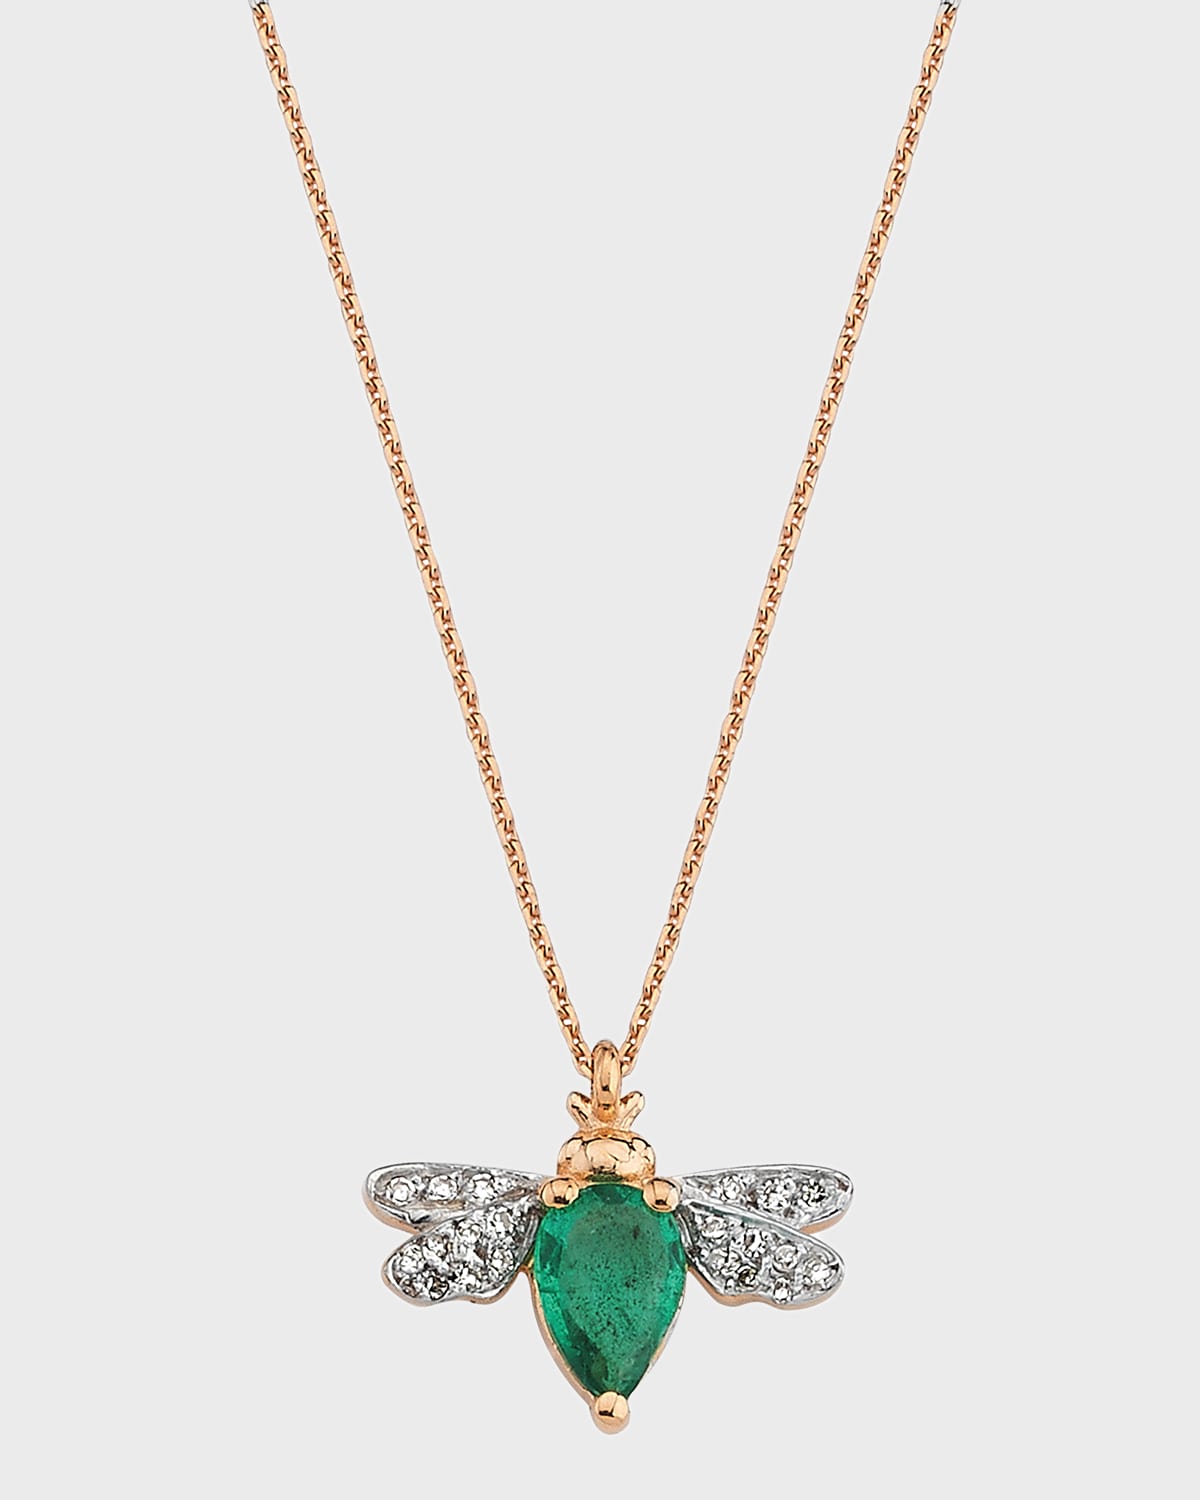 BeeGoddess 14k Rose Gold Bee Diamond and Emerald Necklace